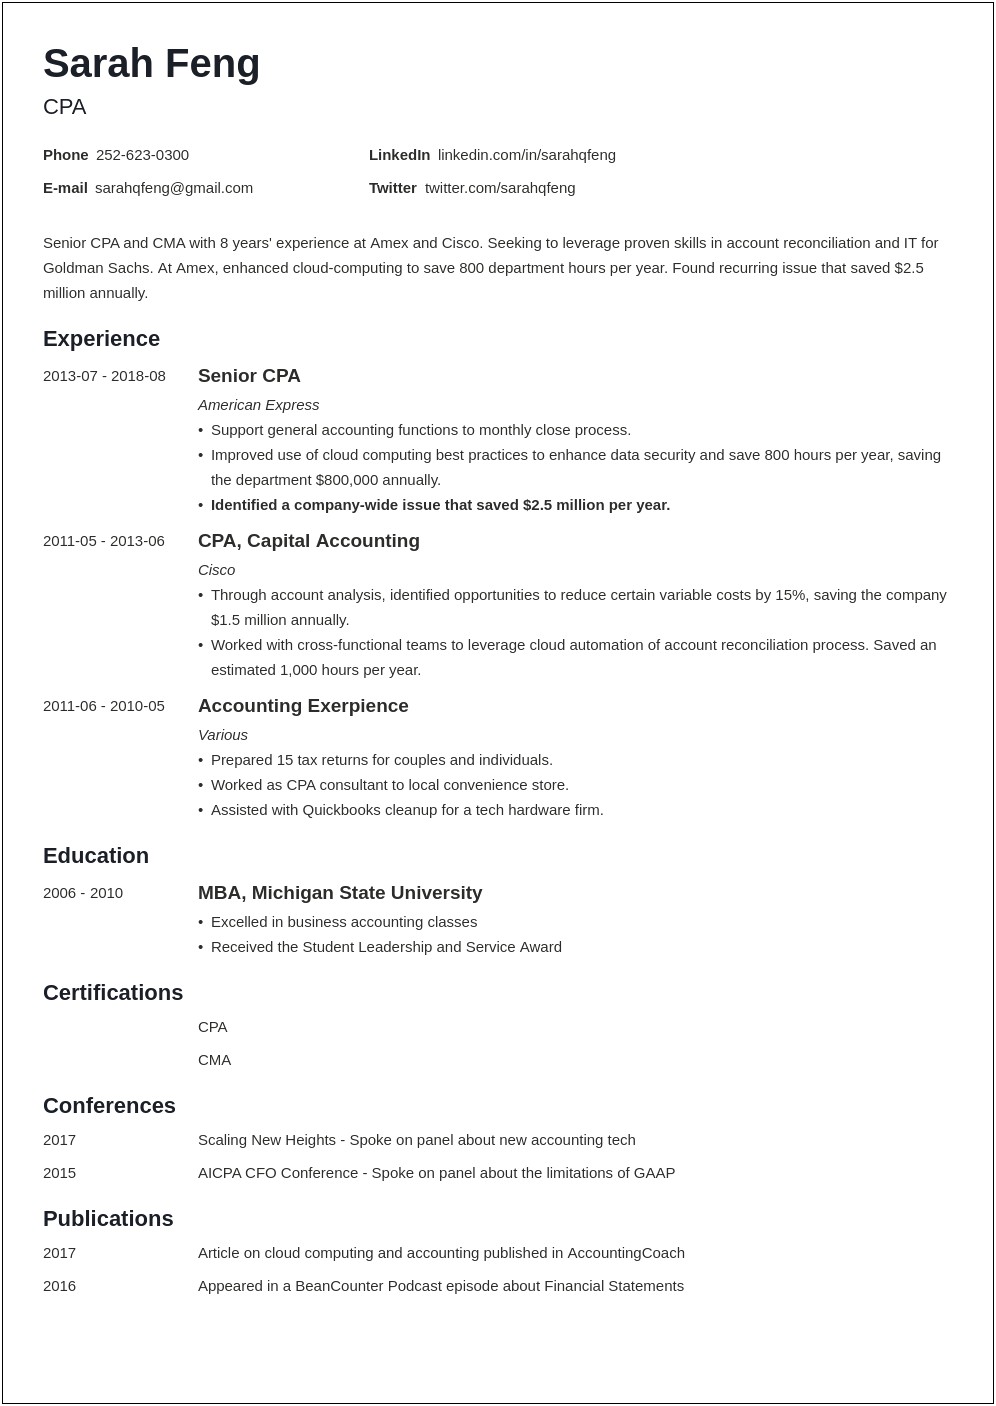 Professional Summary For Entry Level Accounting Resume